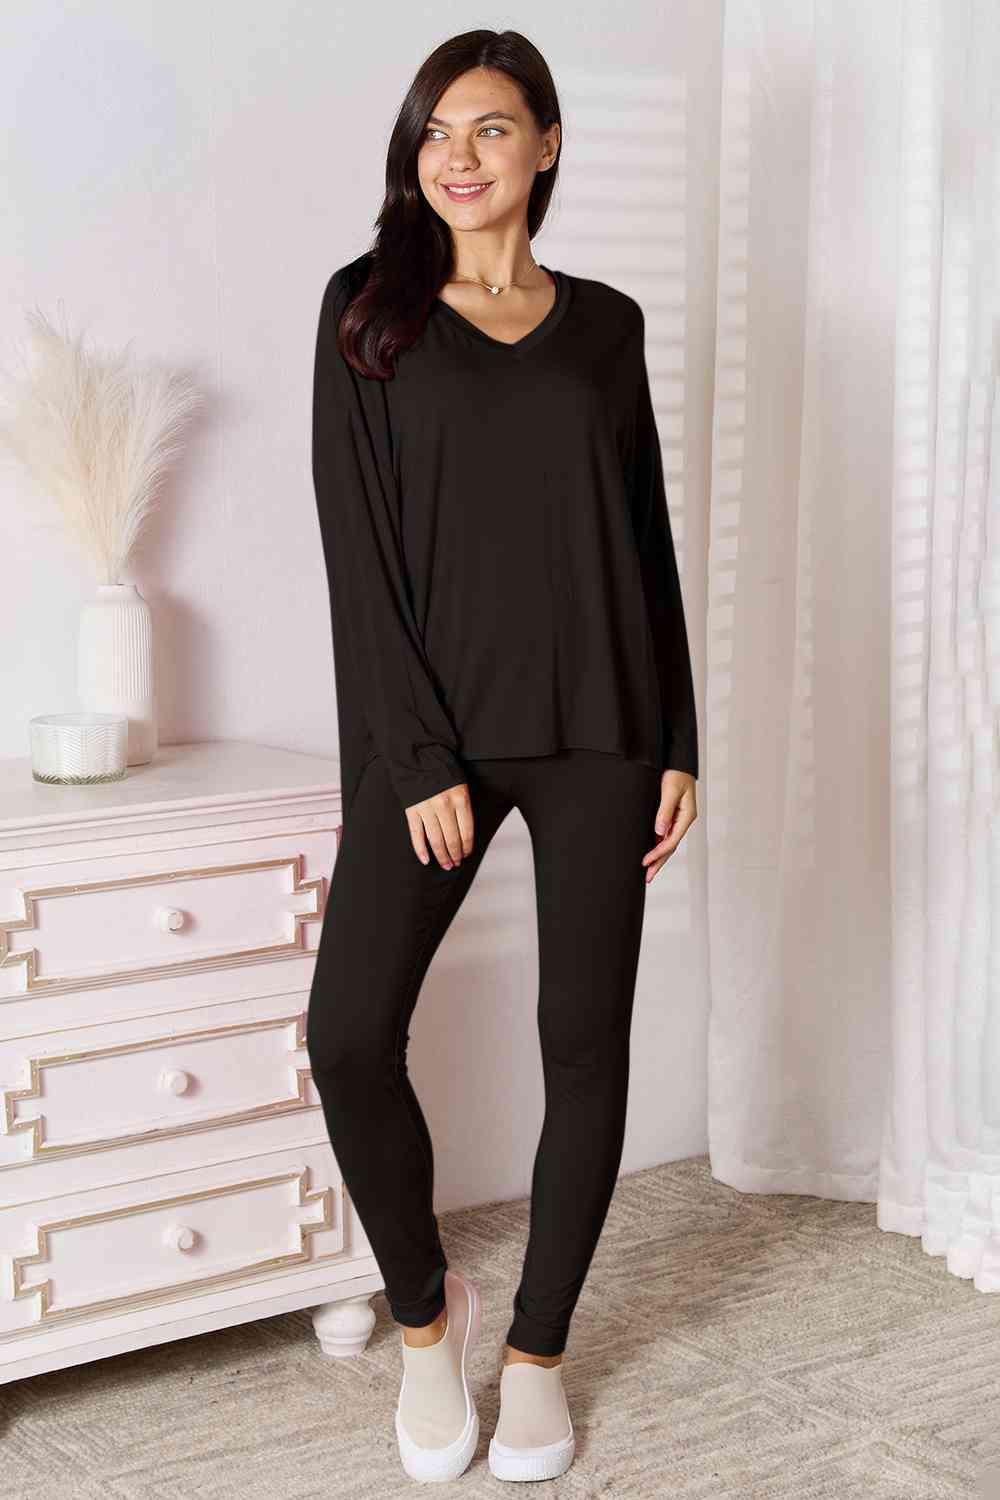 V-Neck Soft Rayon Long Sleeve Top and Pants Lounge Set - Black / S - Bottoms - Outfit Sets - 7 - 2024